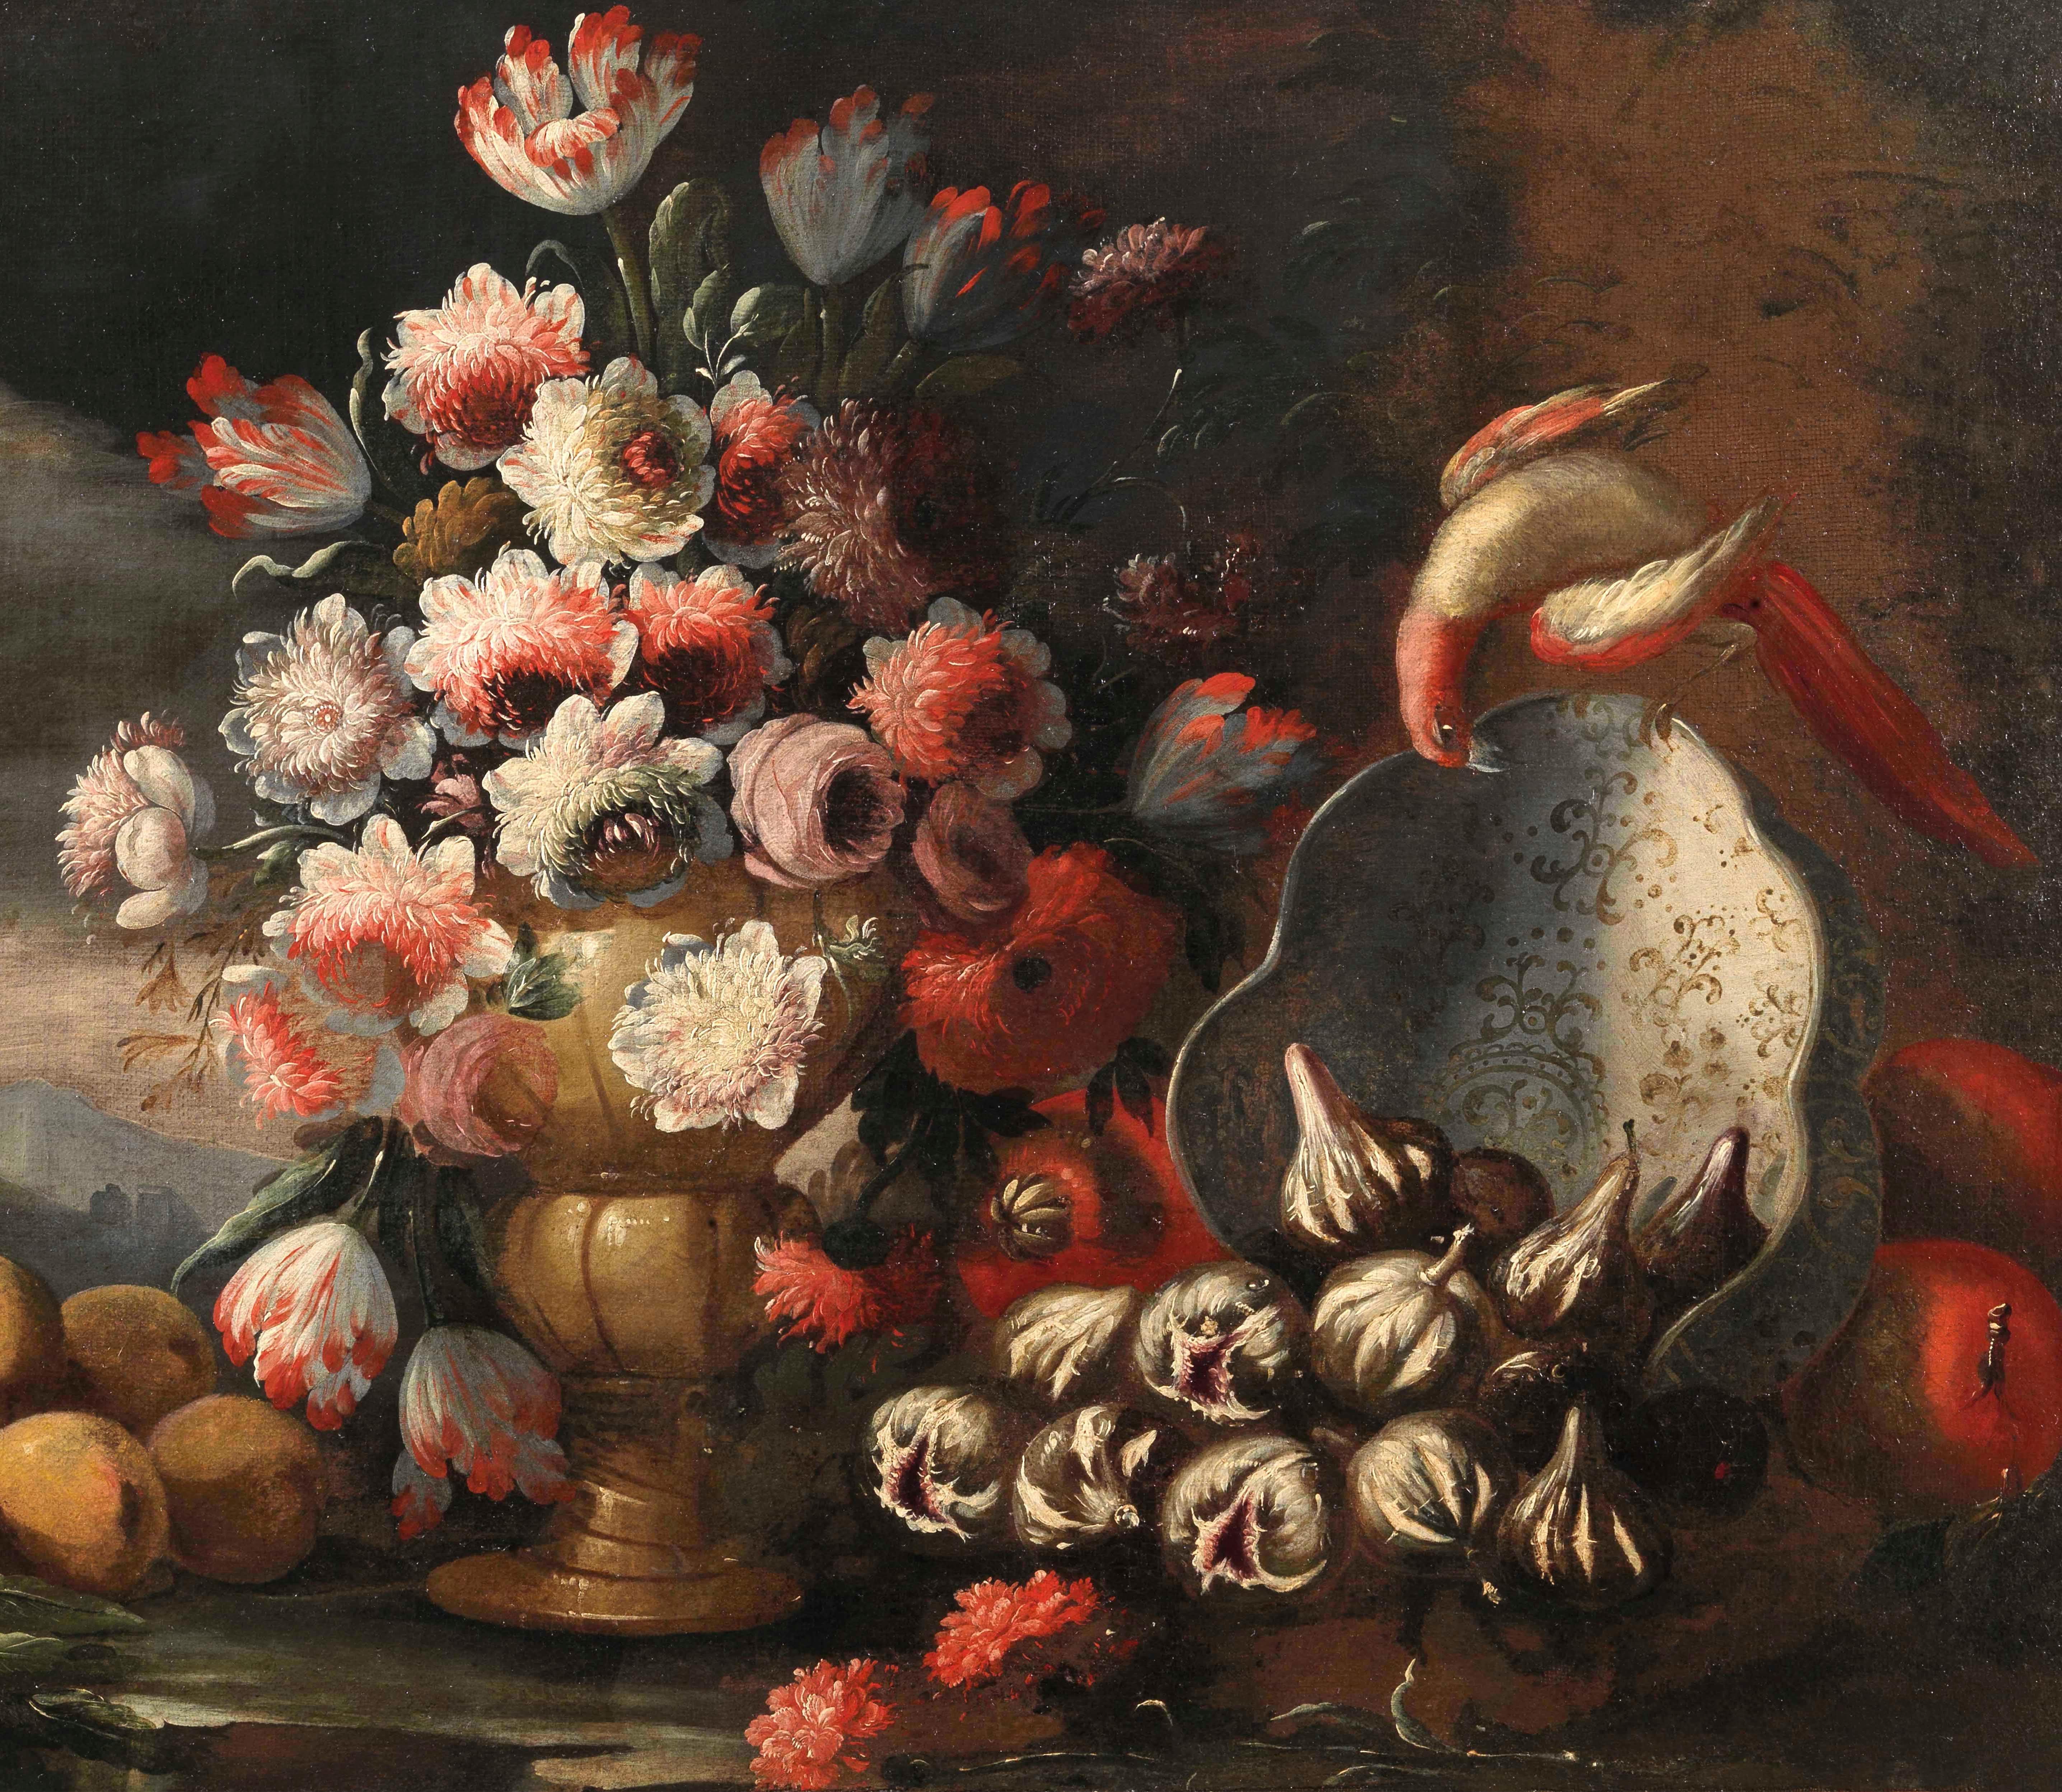 Two Exceptional Italian 18th Century Still-Life Paintings by Lopez & Houbraken 2